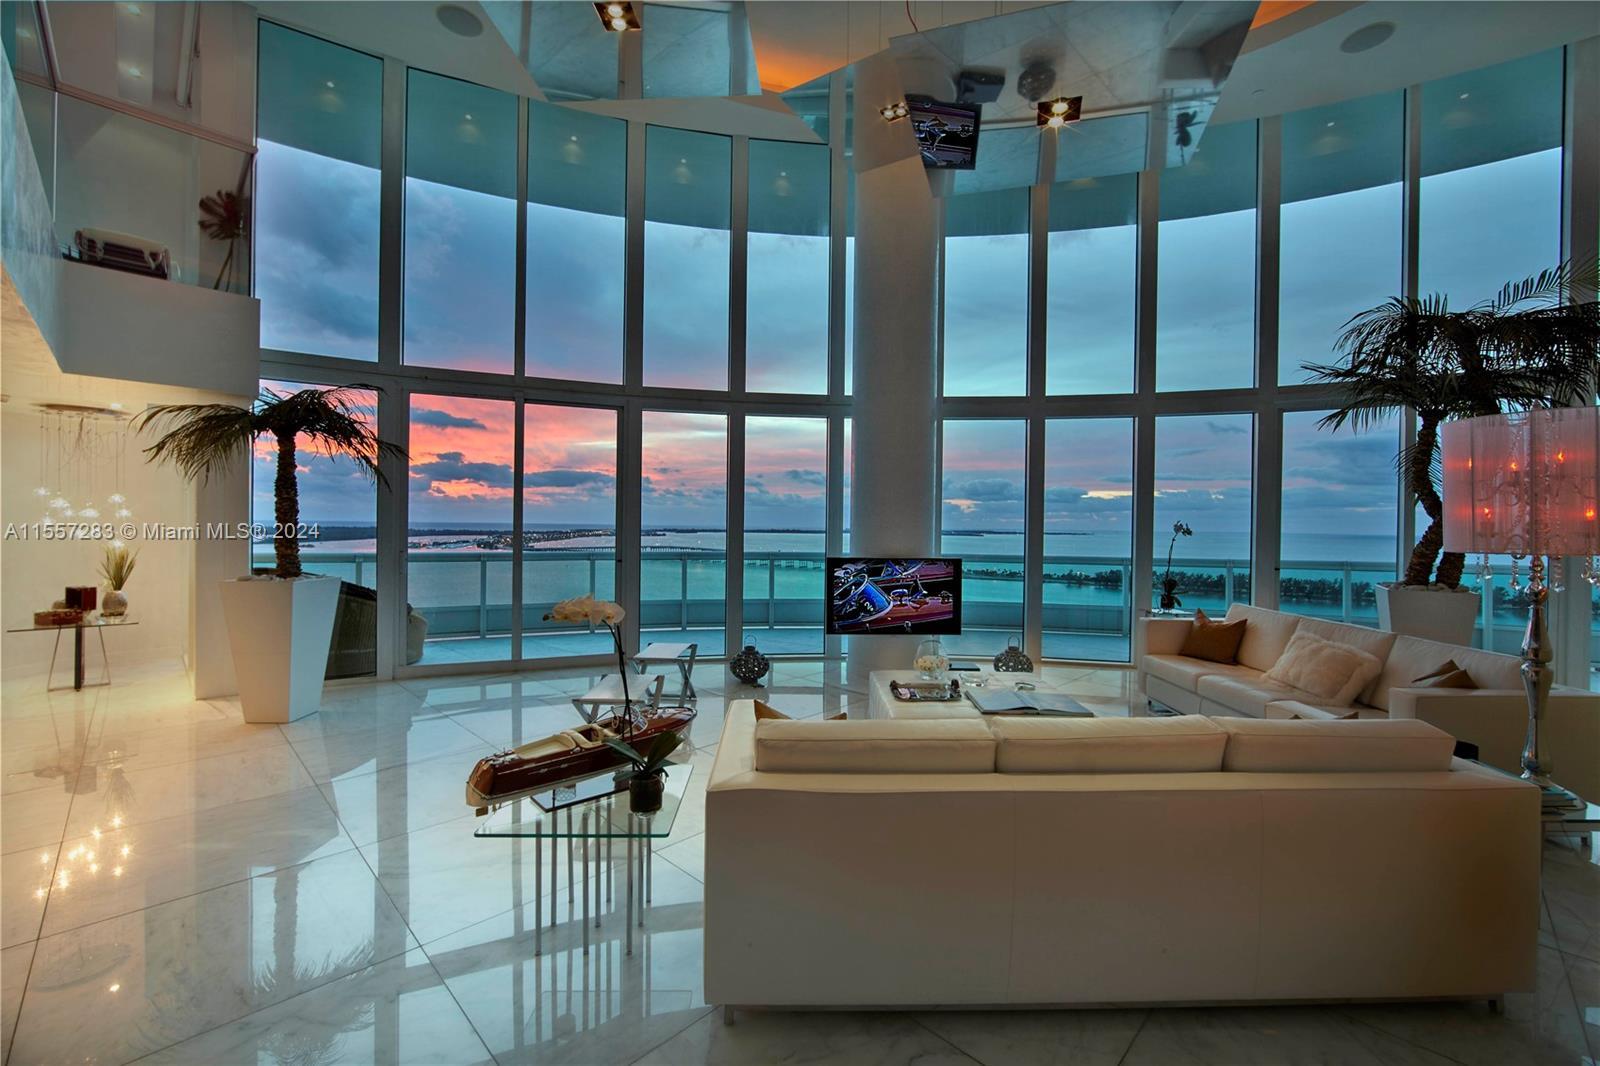 Modern and elegant 2 story unit with double height ceiling at Santa Maria in Brickell. 4BR/4.5BA tot